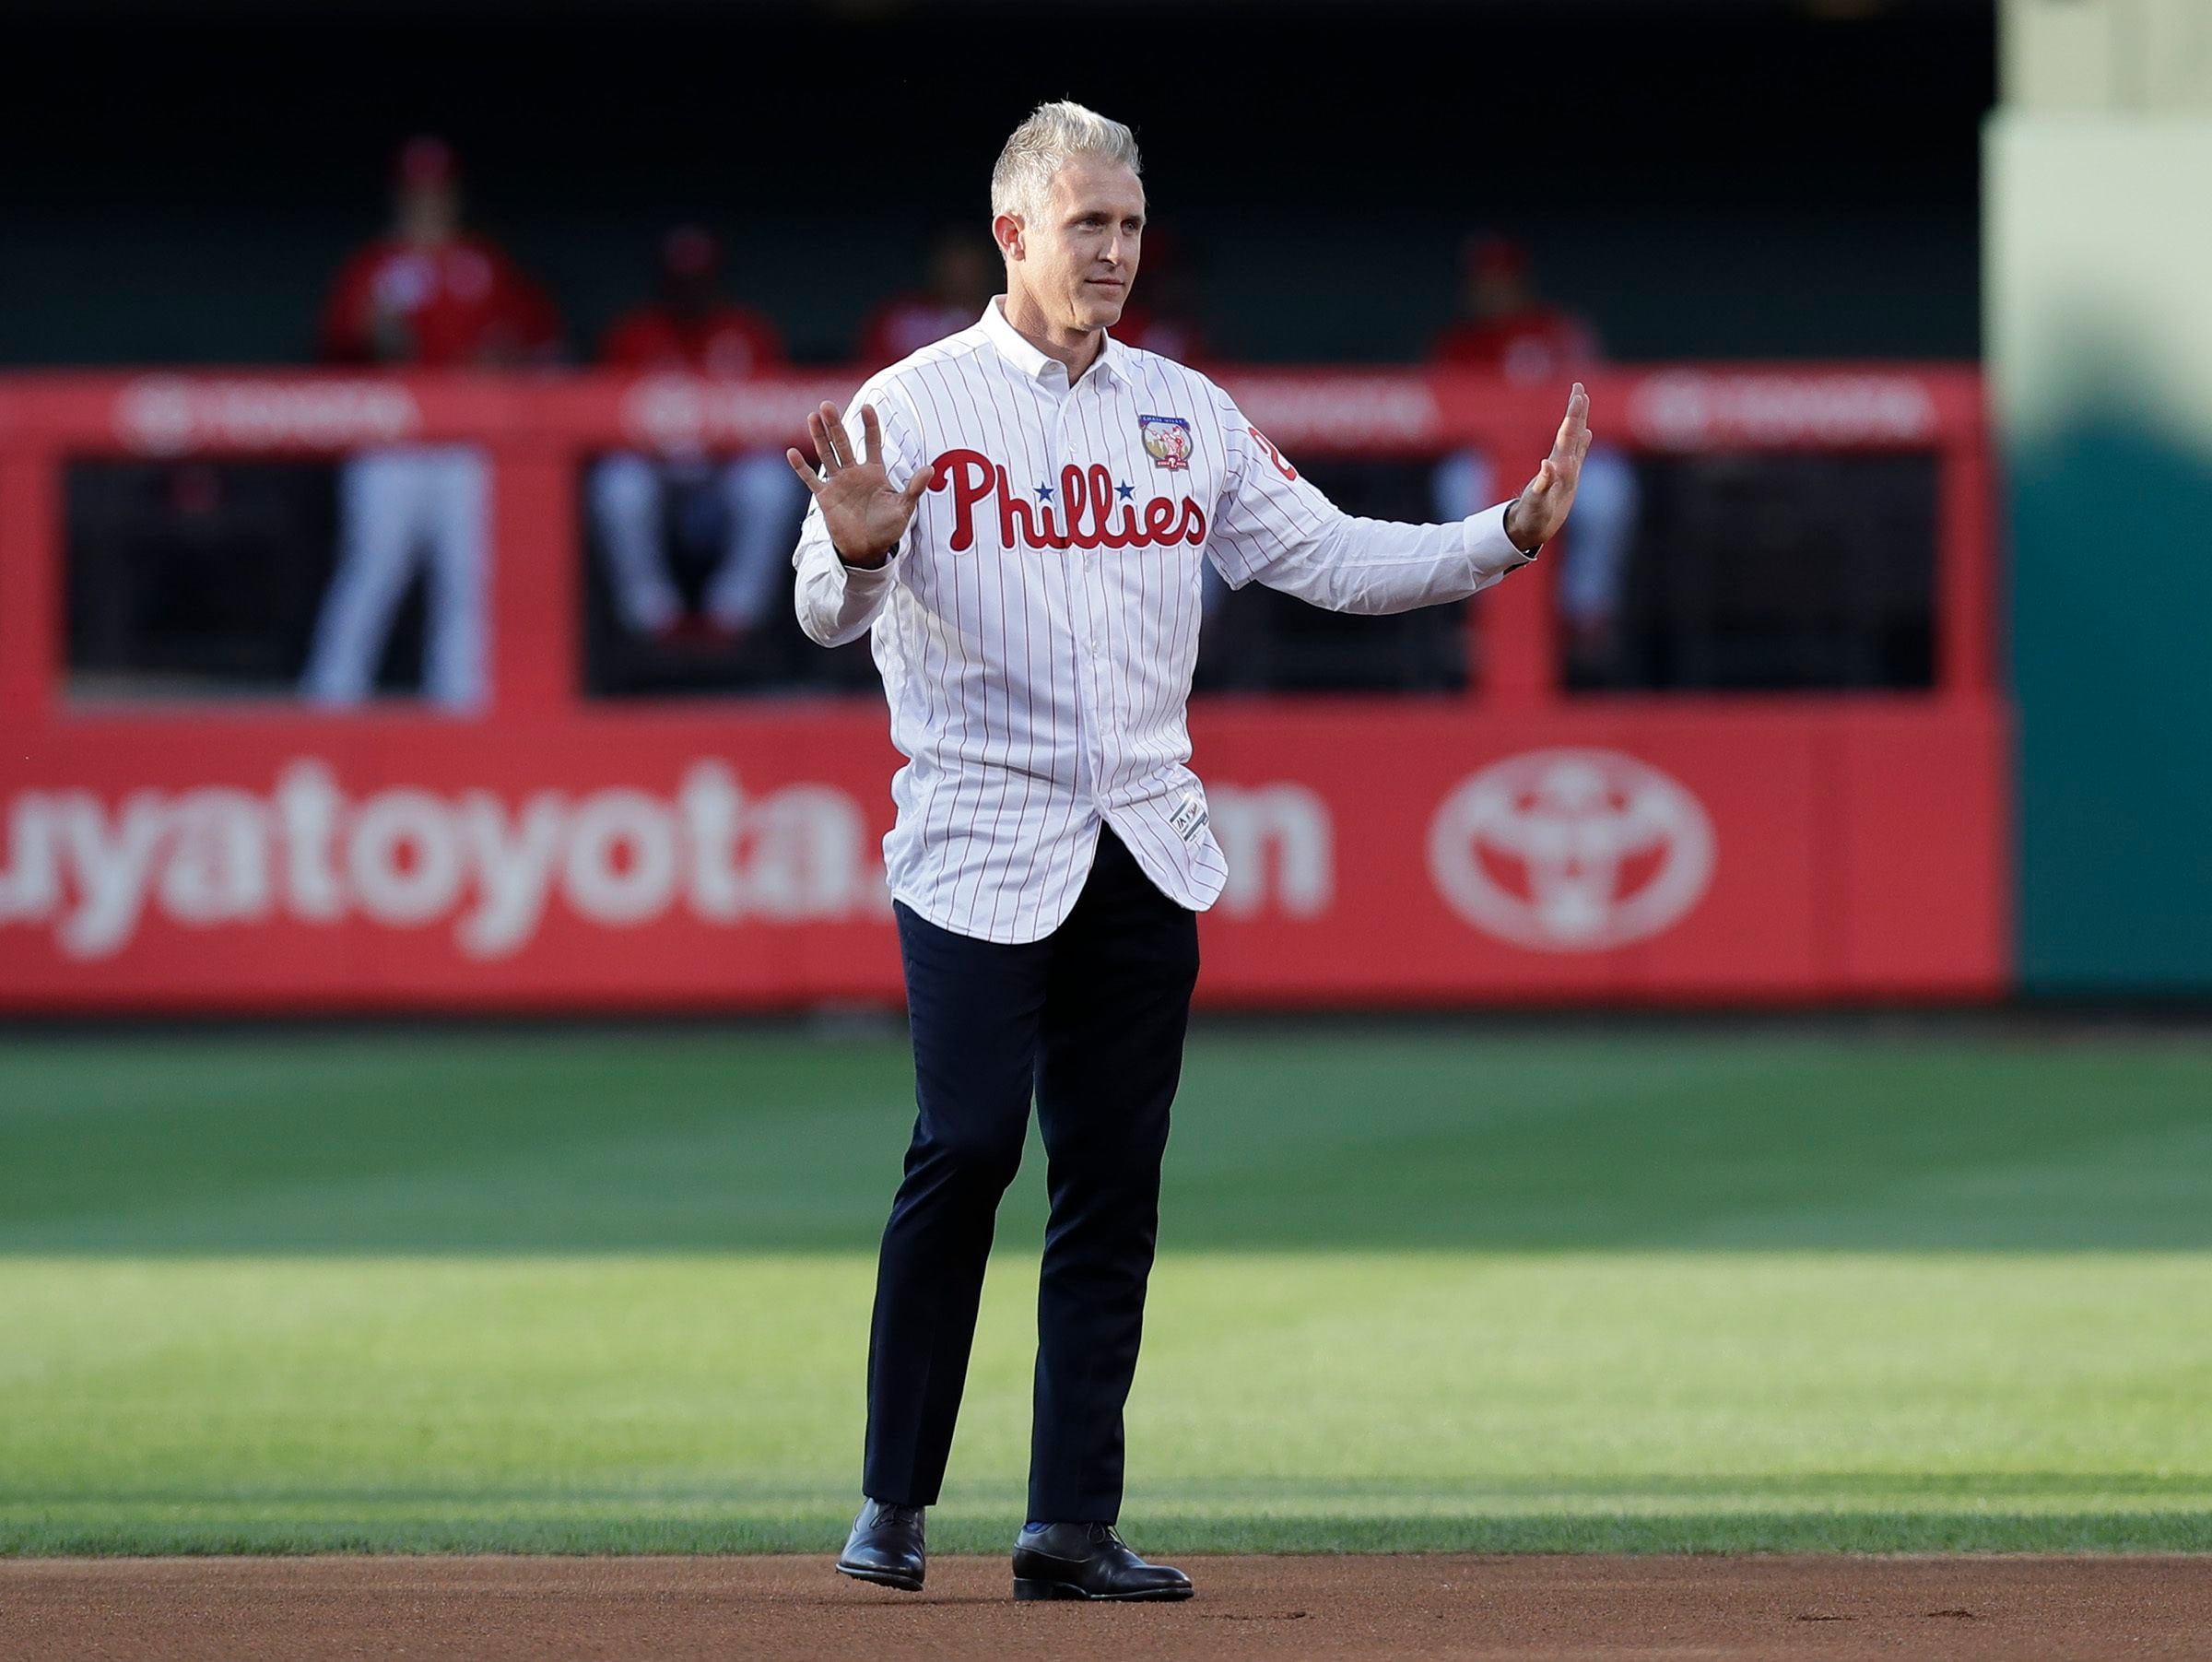 Phillies honor Chase Utley's retirement at Citizens Bank Park